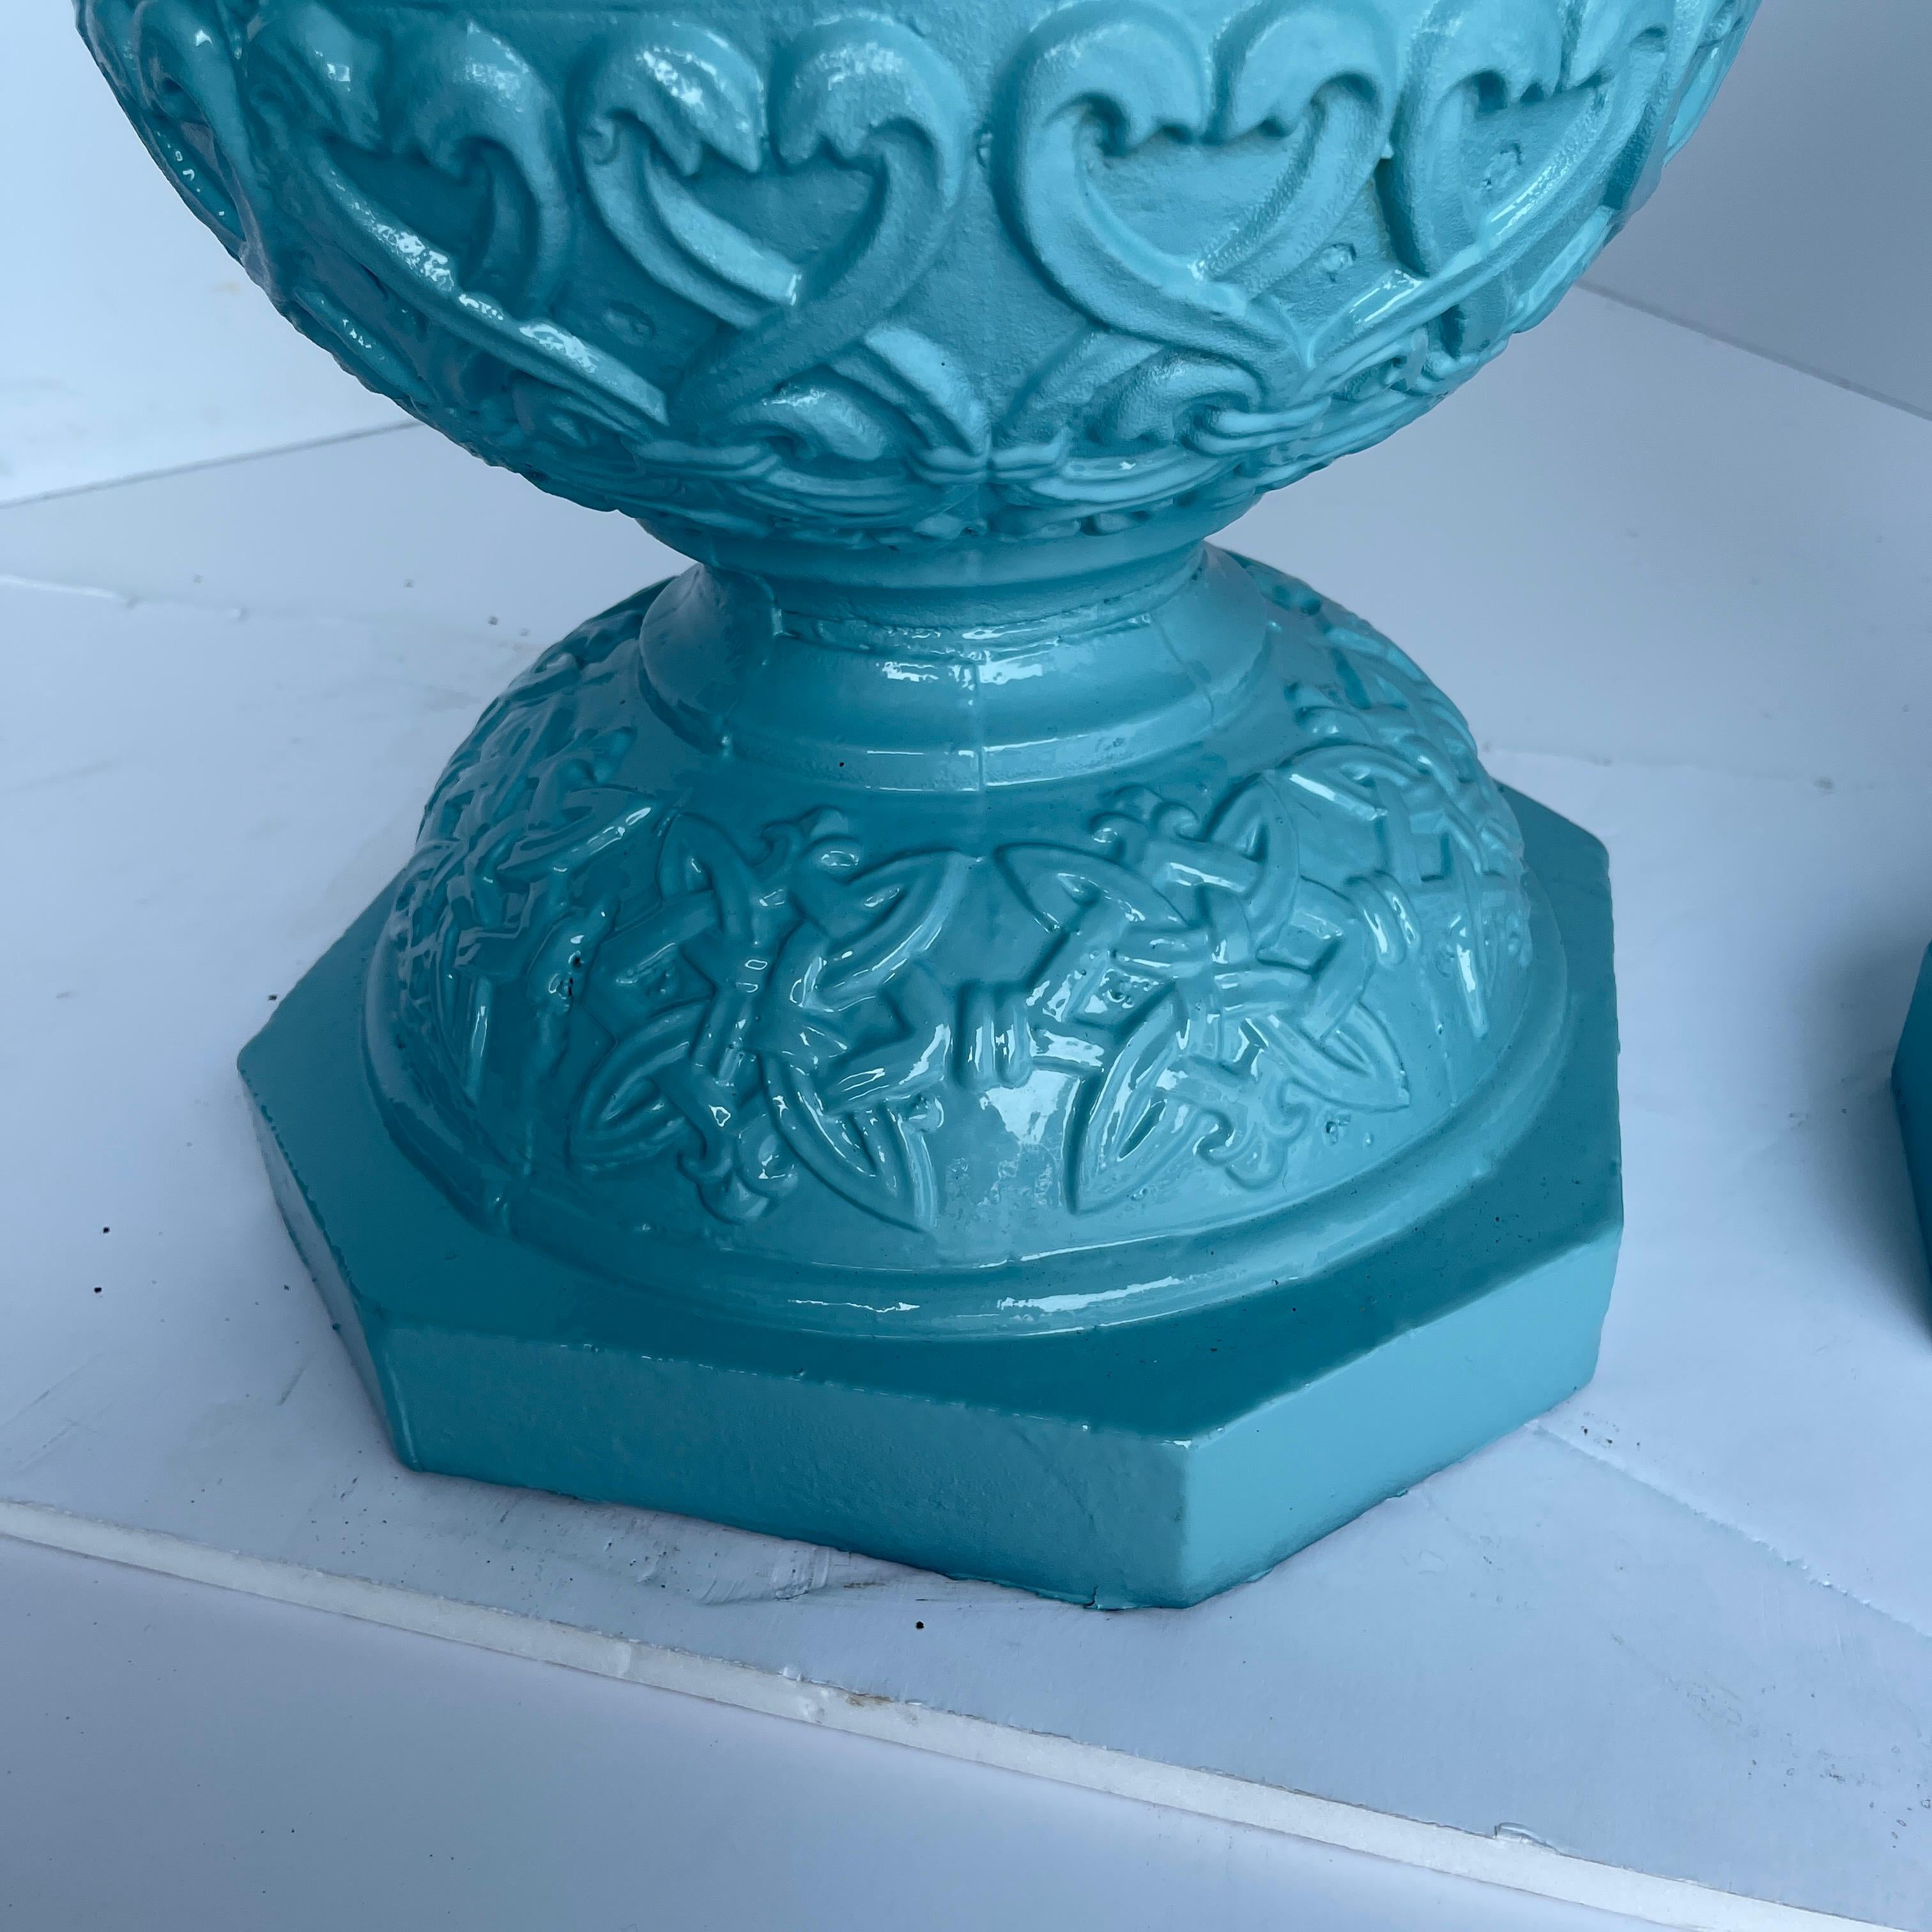 Pair Large Cast Iron Garden Urns, Powder Coated Turquoise In Good Condition For Sale In Haddonfield, NJ